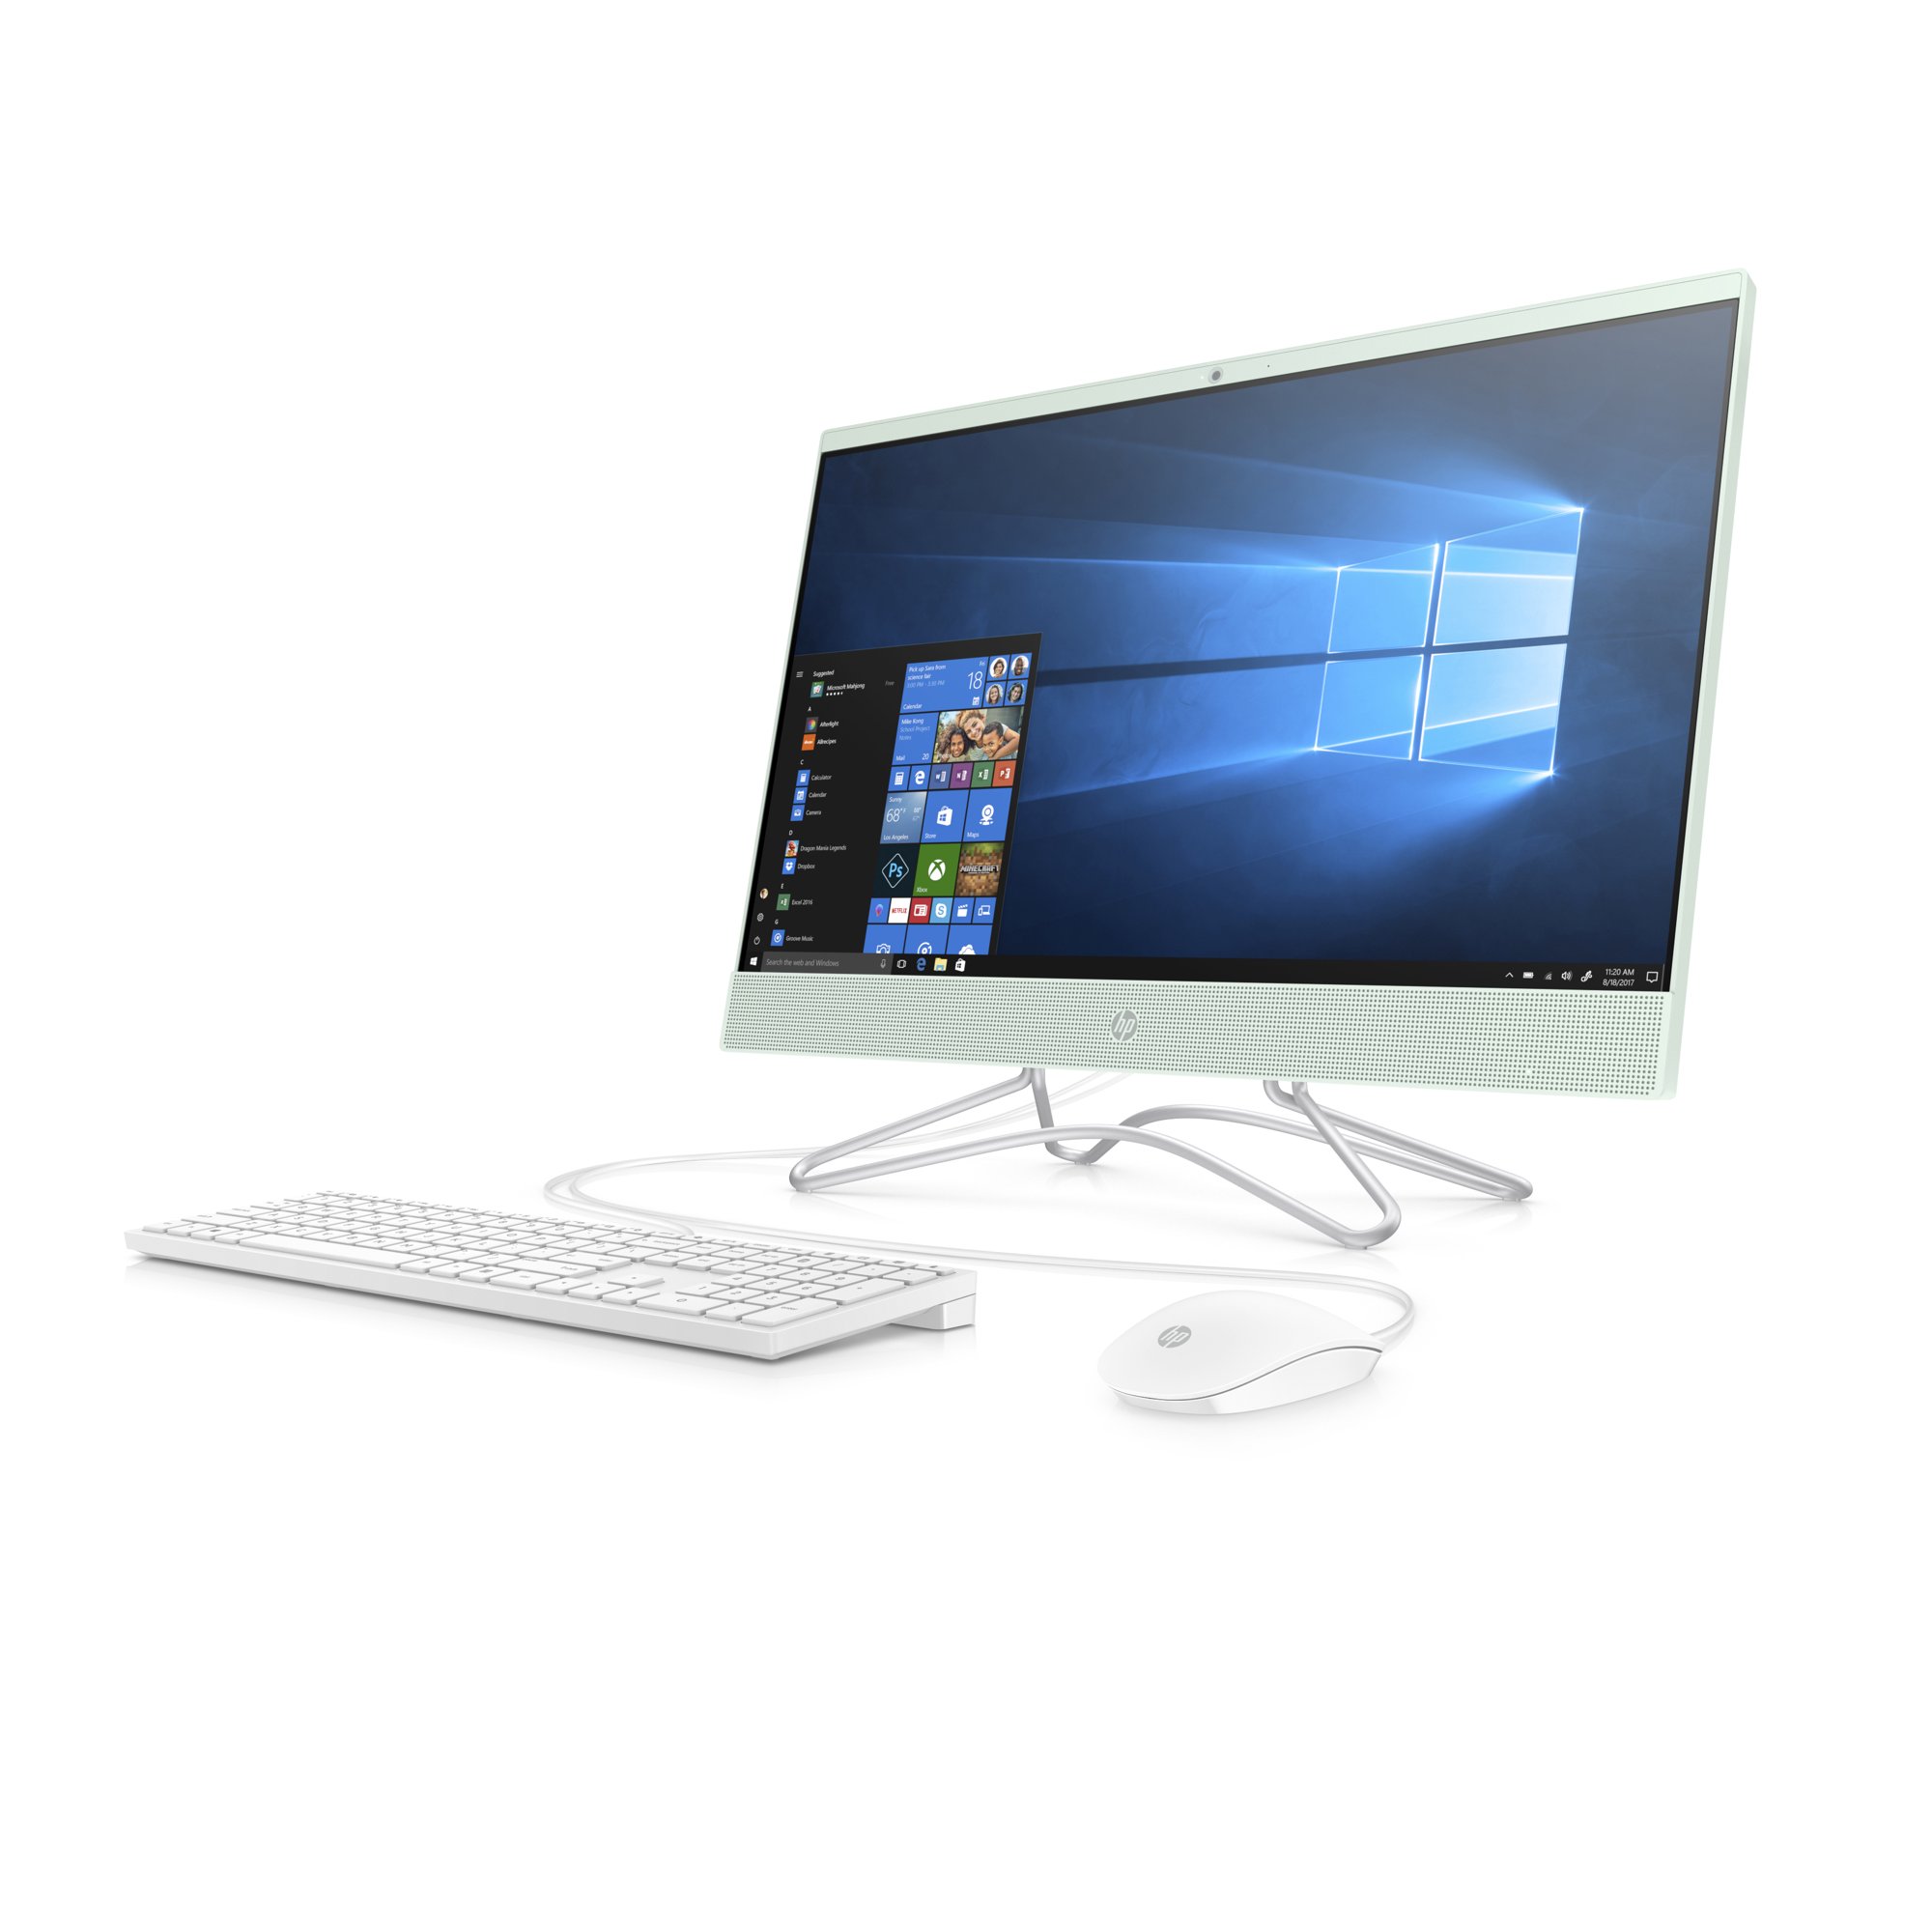 HP 22-c0073w All-in-One, 22" Display, Intel Celeron G4900T 2.9 GHz, 4GB RAM, 1TB HDD, Mint Color - image 3 of 5